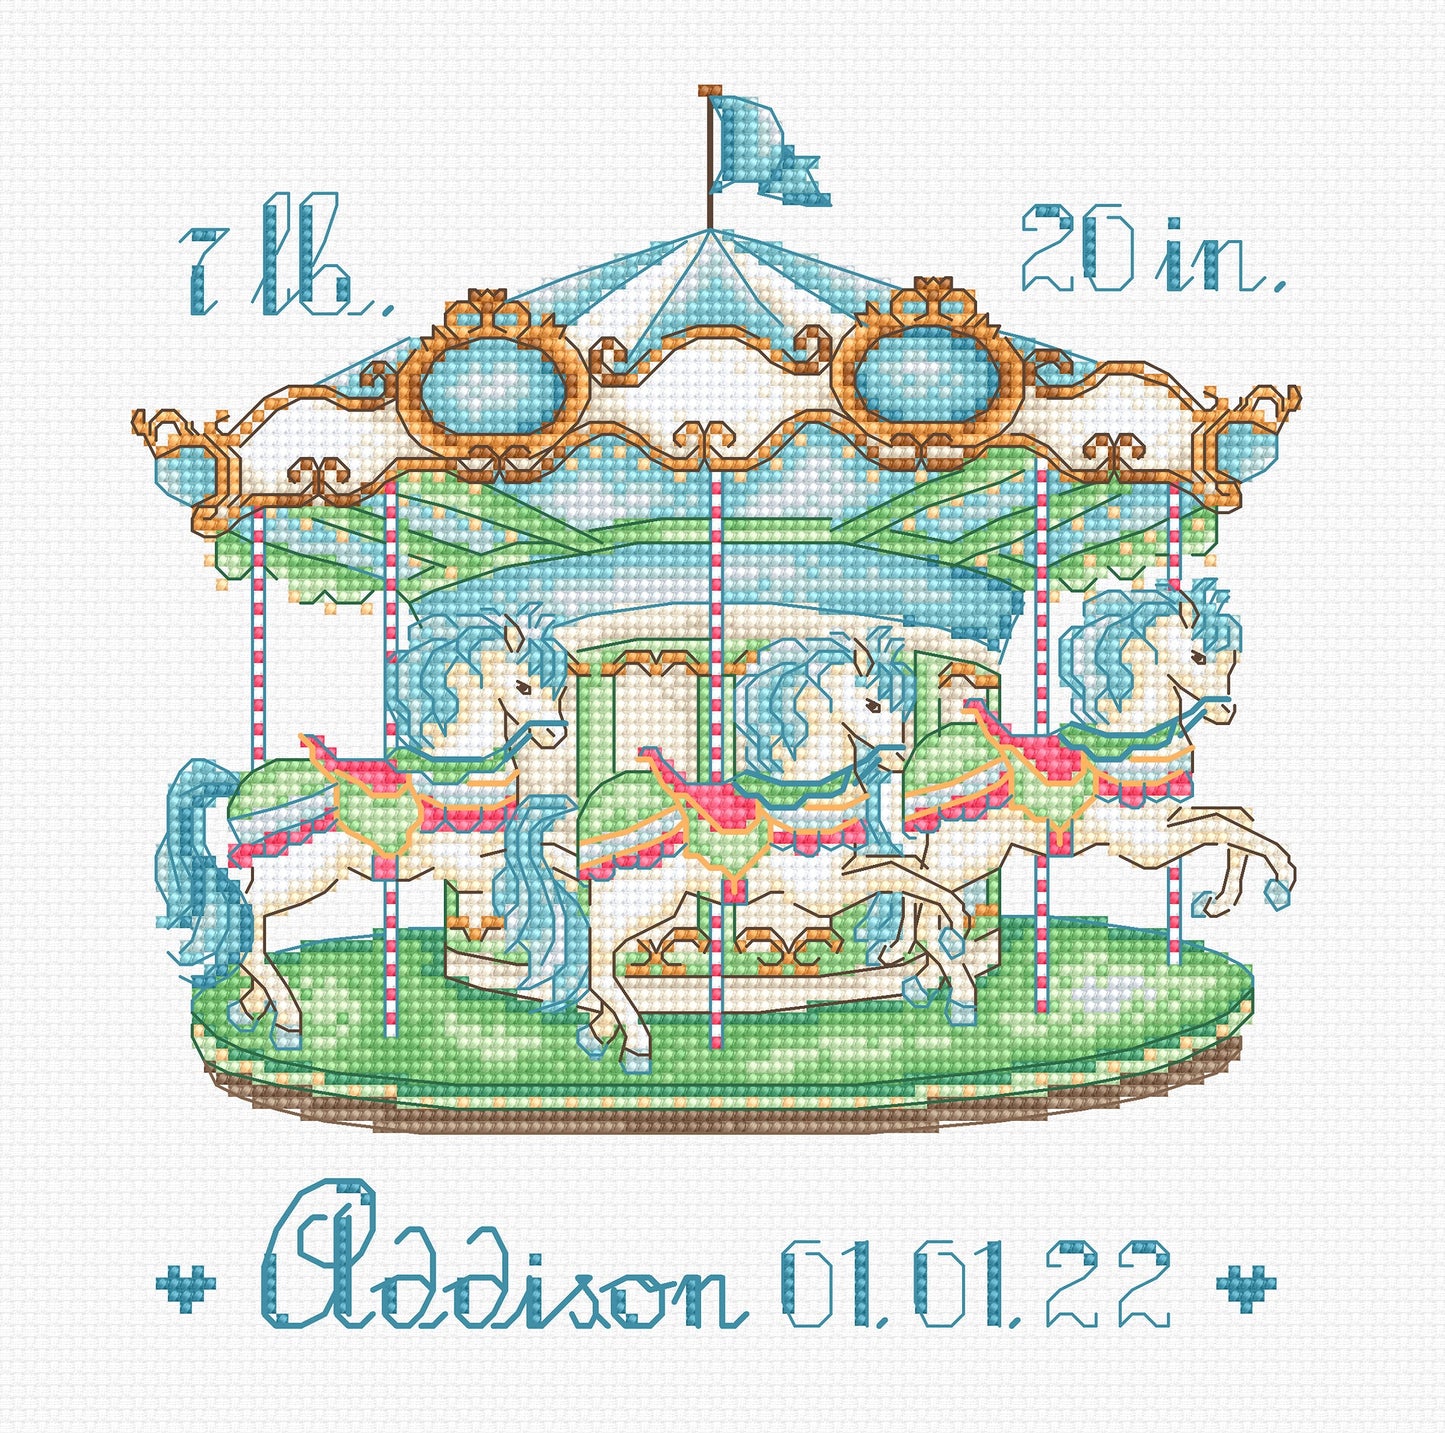 Set de broderie Letistitch - Baby Carousel